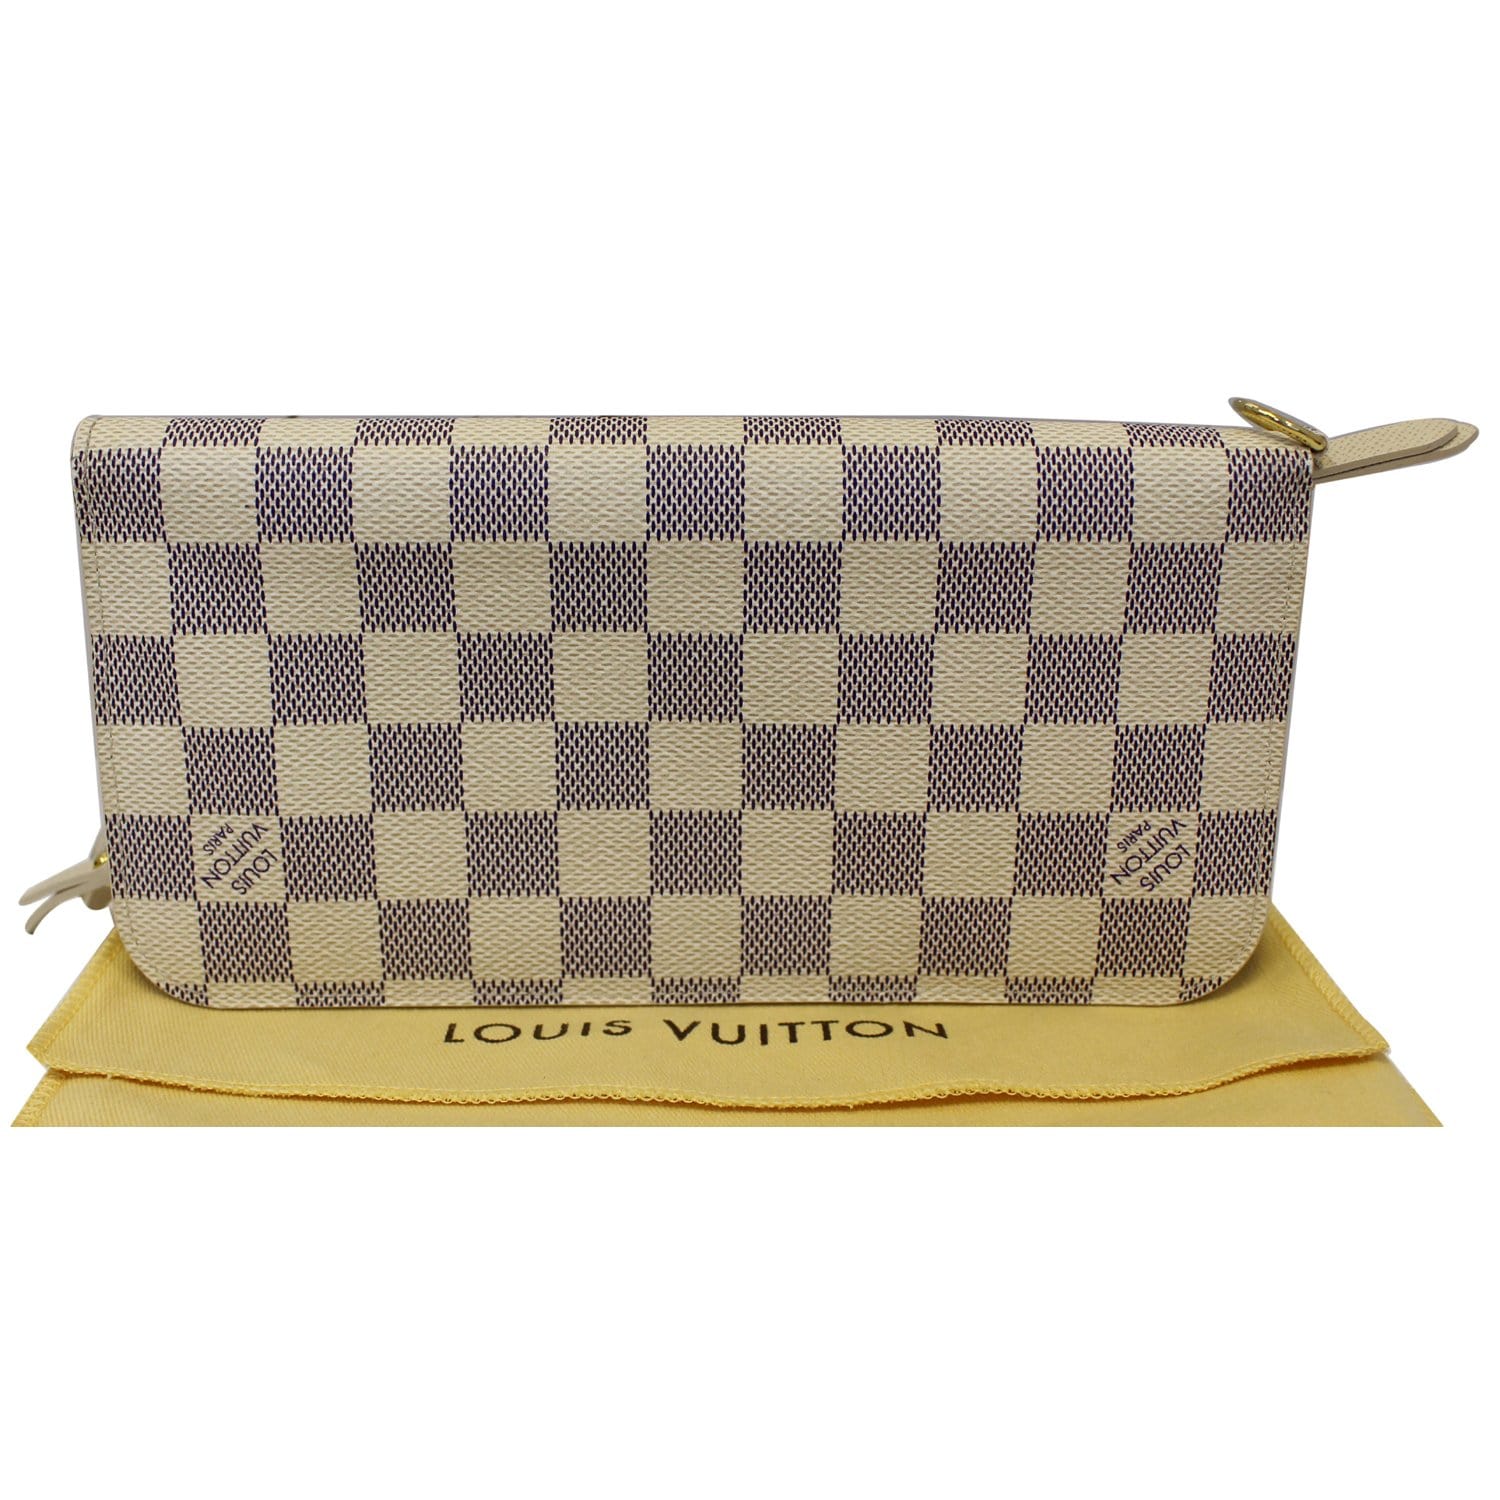 I kove the Louis Vuitton Insolite wallet. It has 12 credit card